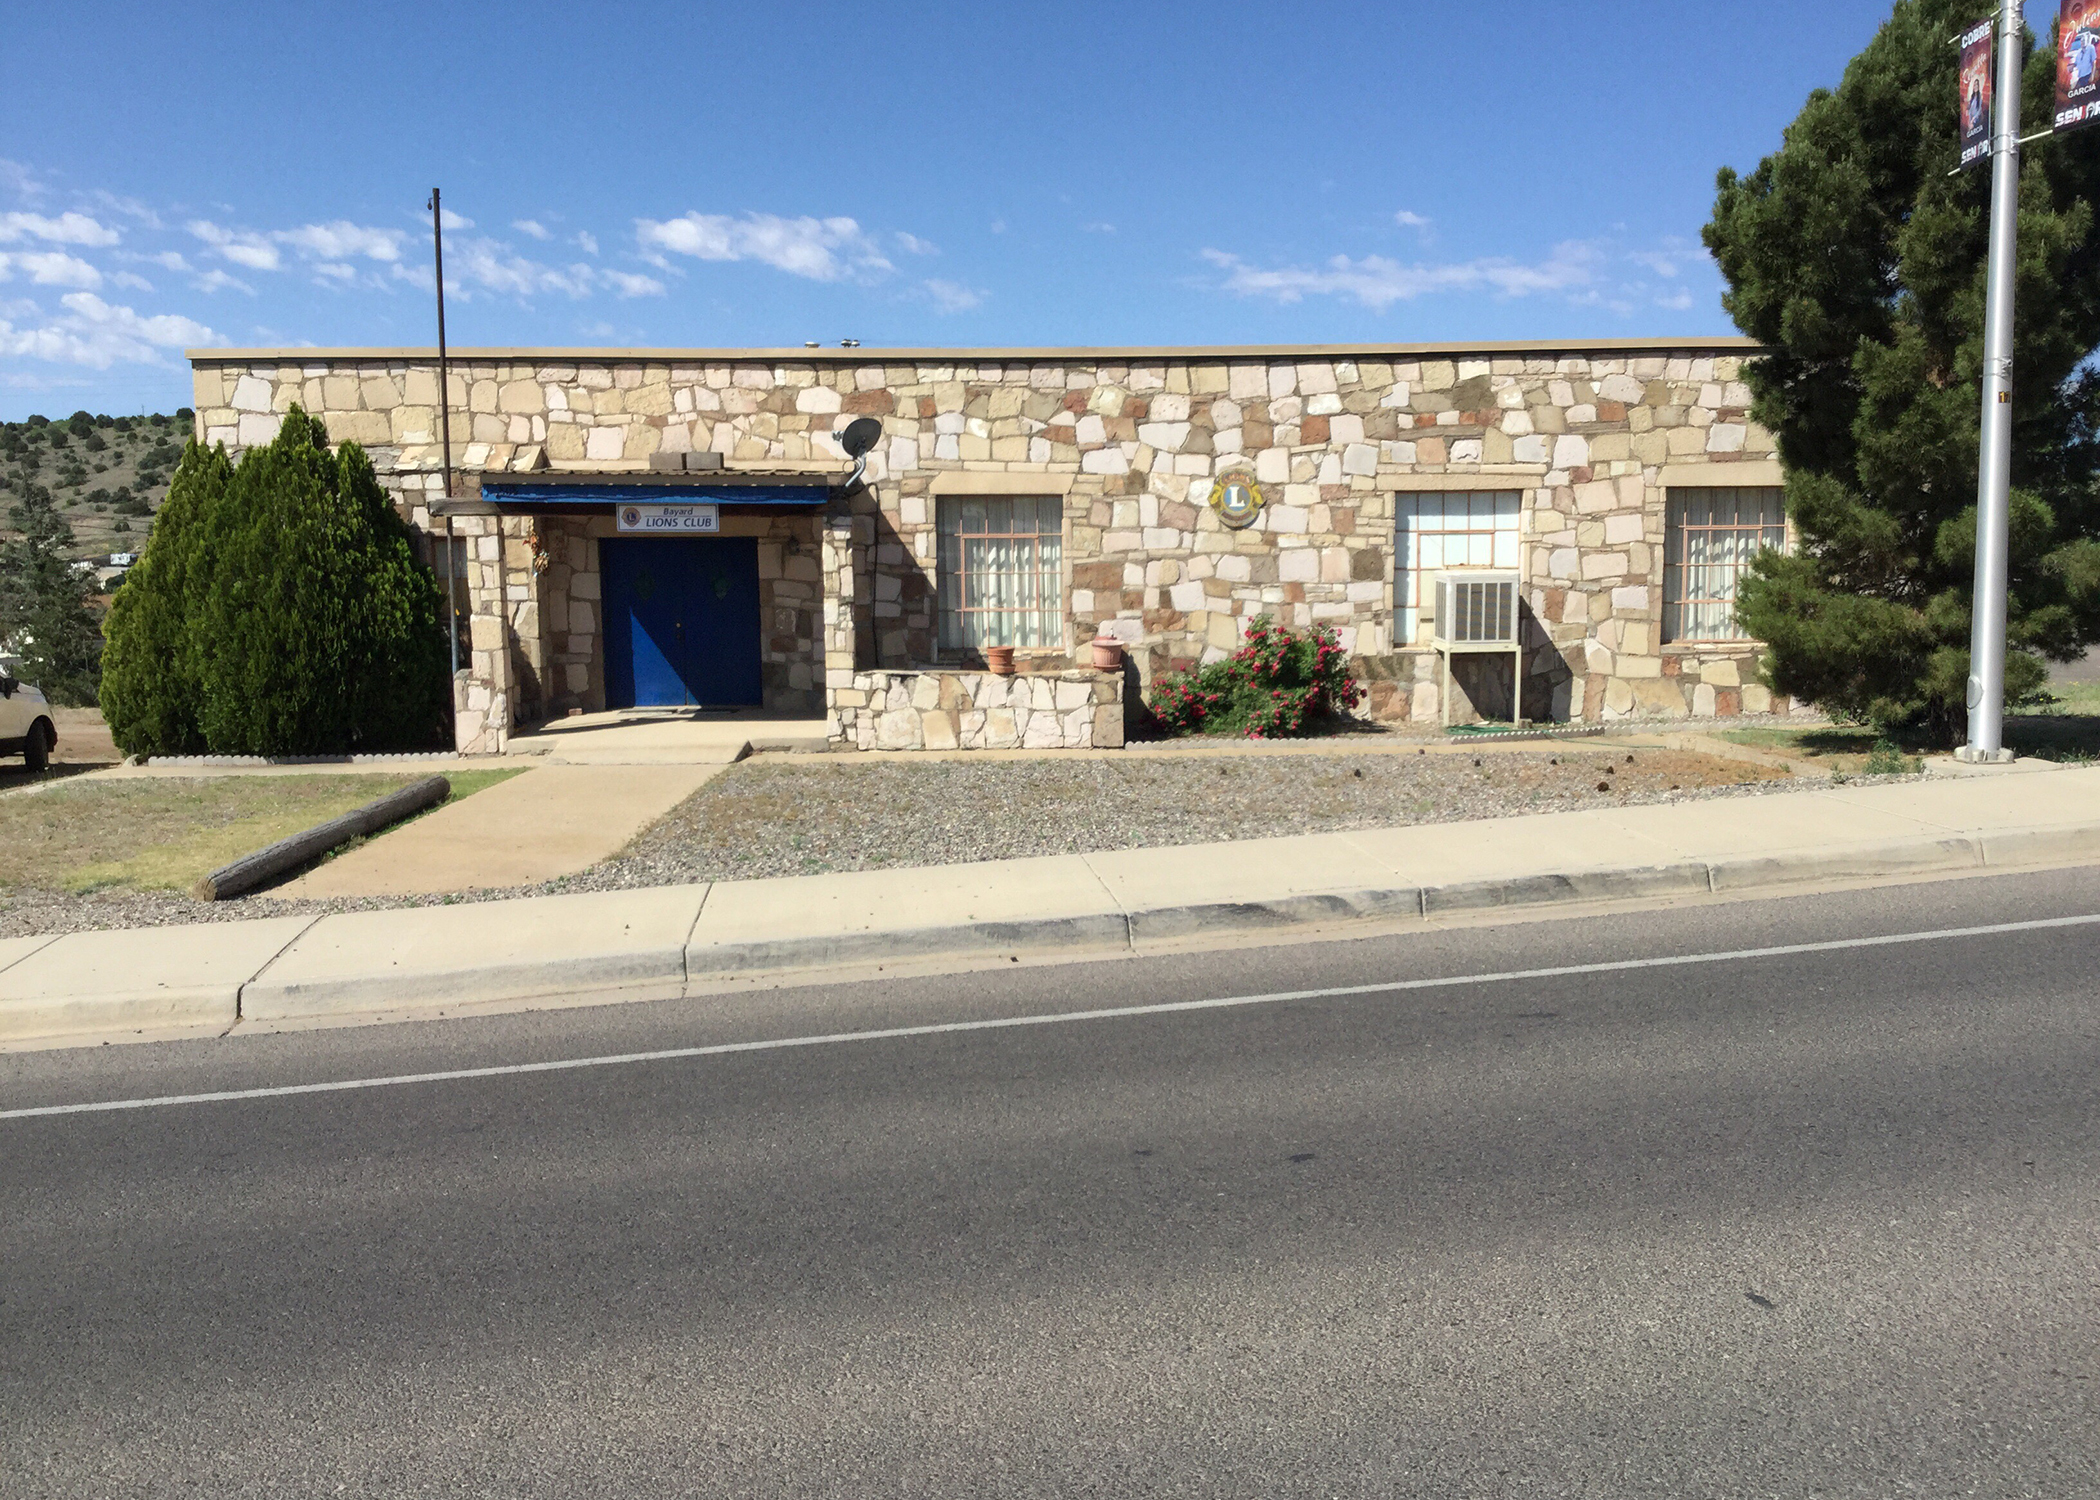 The Lions Club building in Bayard, New Mexico.